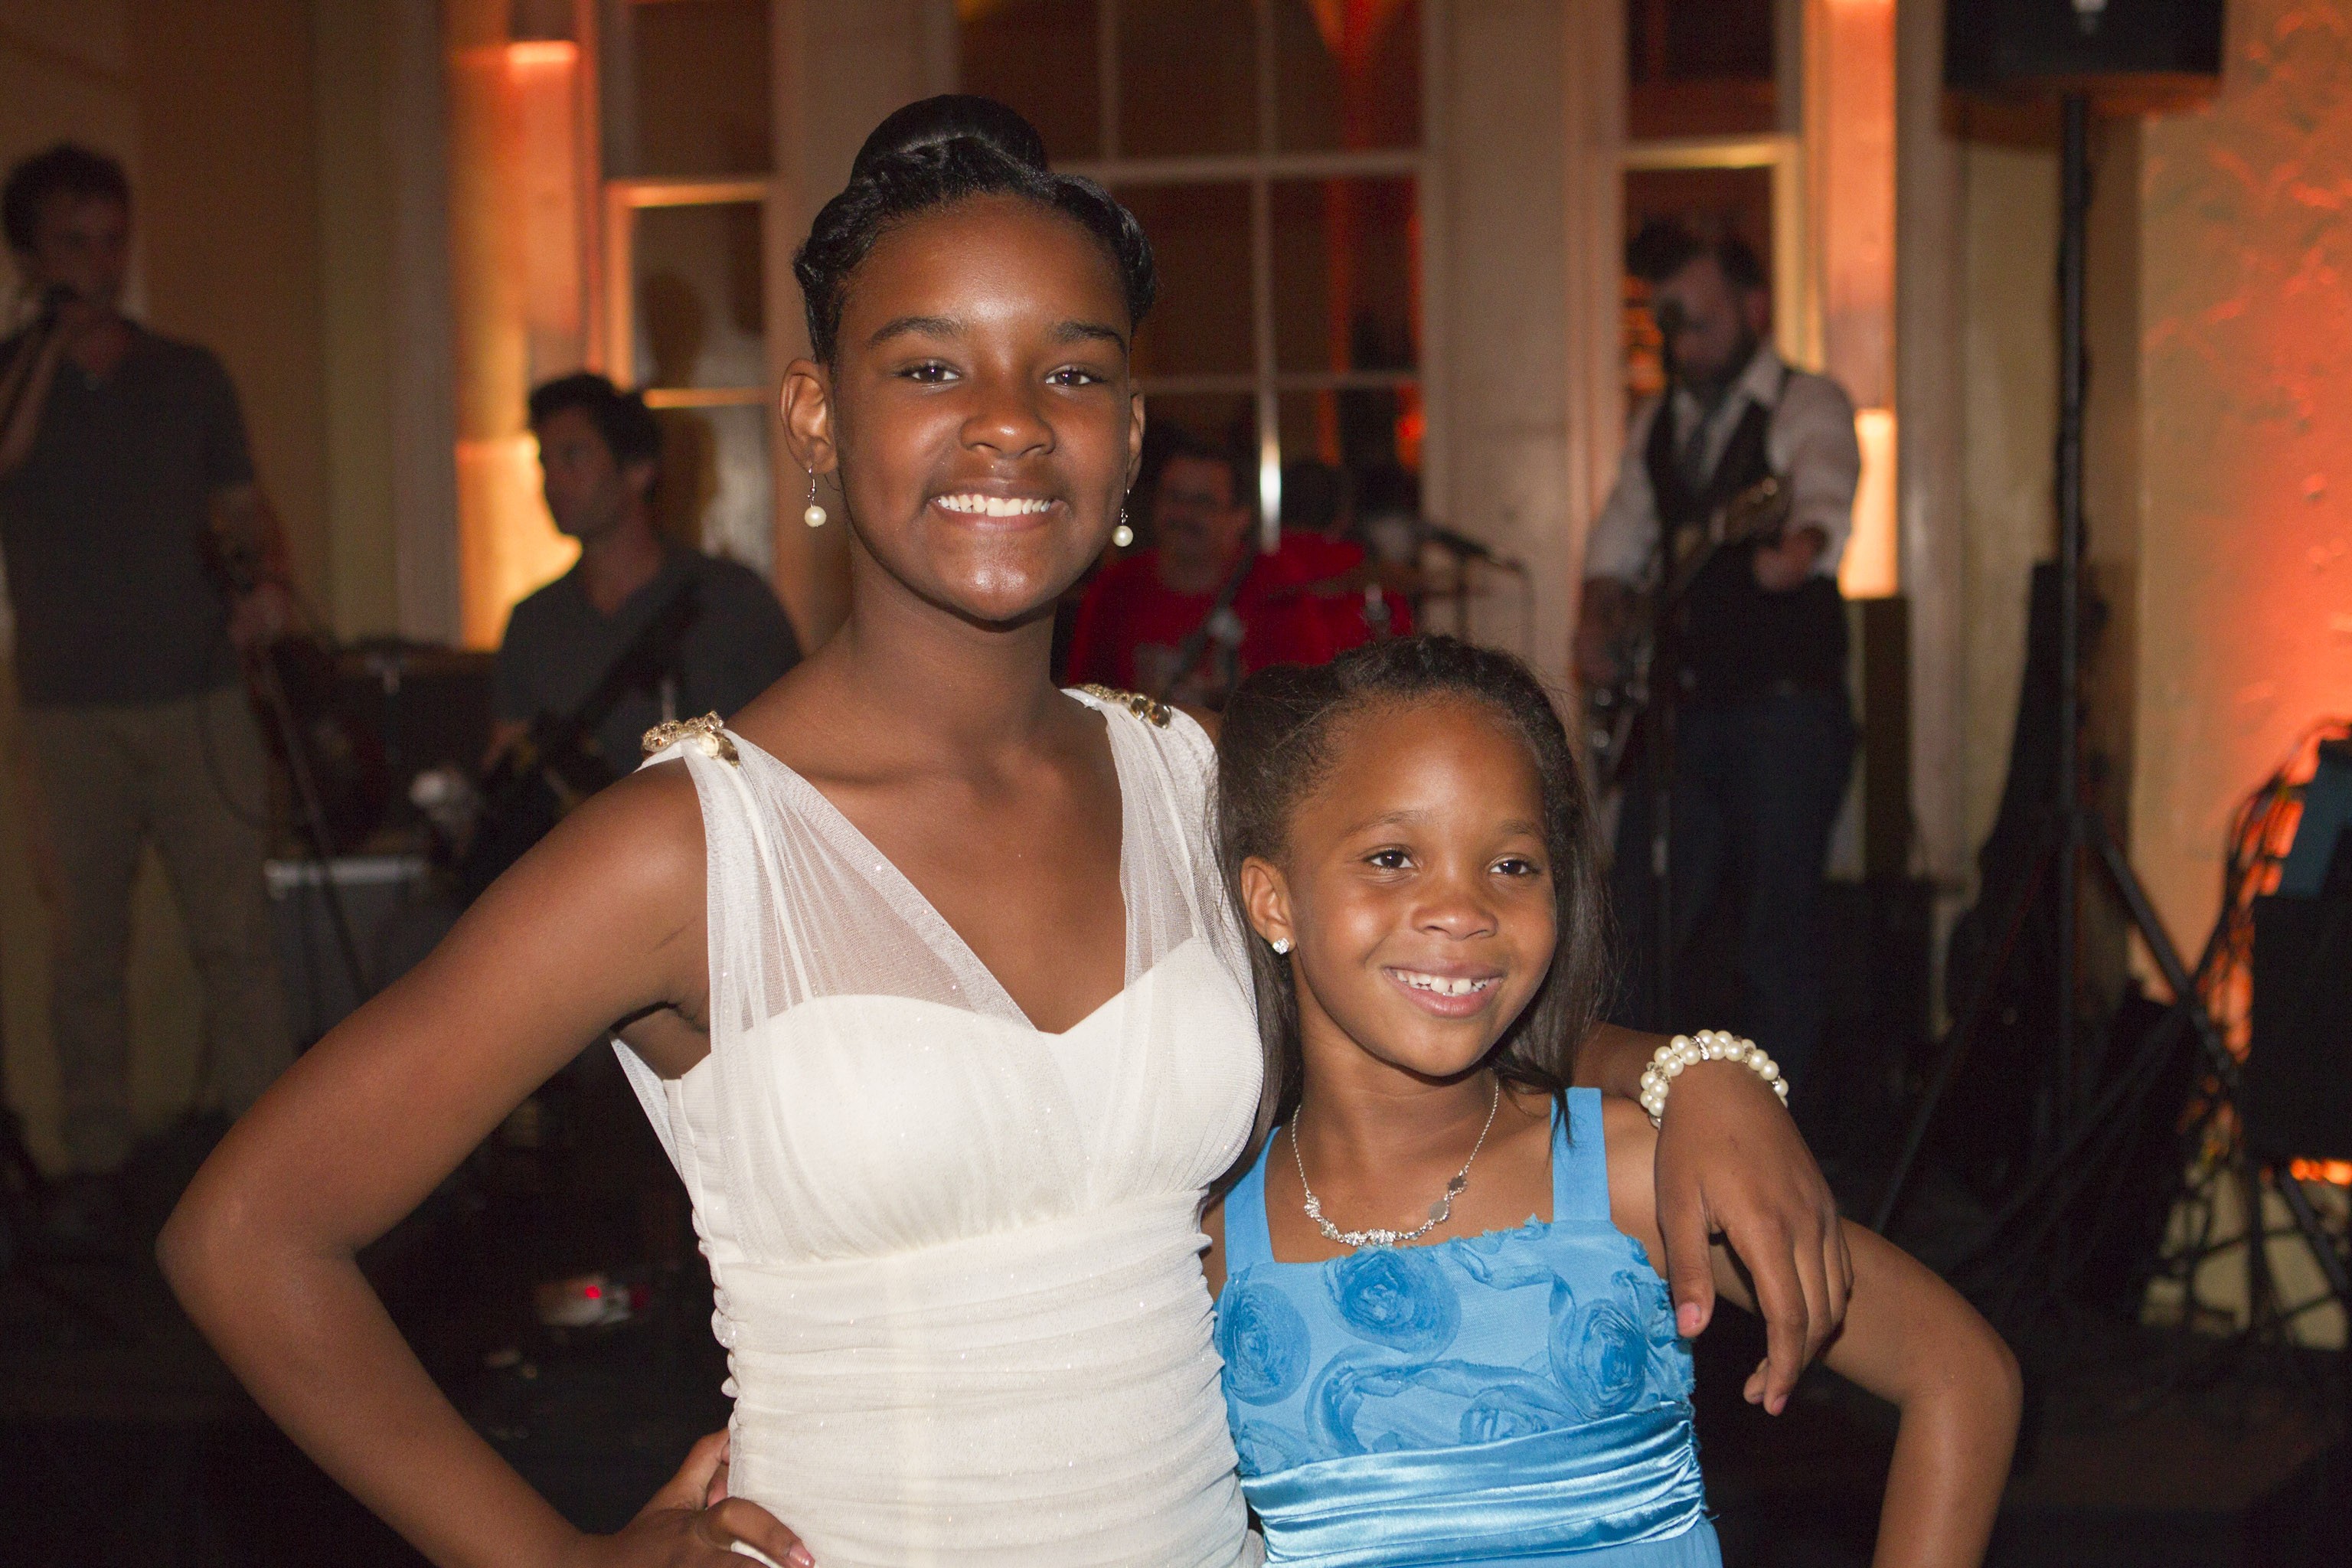 NEW ORLEANS, LA - JUNE 25: (L-R) Actresses Jonshel Alexander and Quvenzhane Wallis on the dance floor at Fox Searchlight Pictures Presents "Beasts of the Southern Wild" After Party on June 25, 2012 in New Orleans, Louisiana. (Photo by Skip Bolen/Getty Ima (Foto: Getty Images)